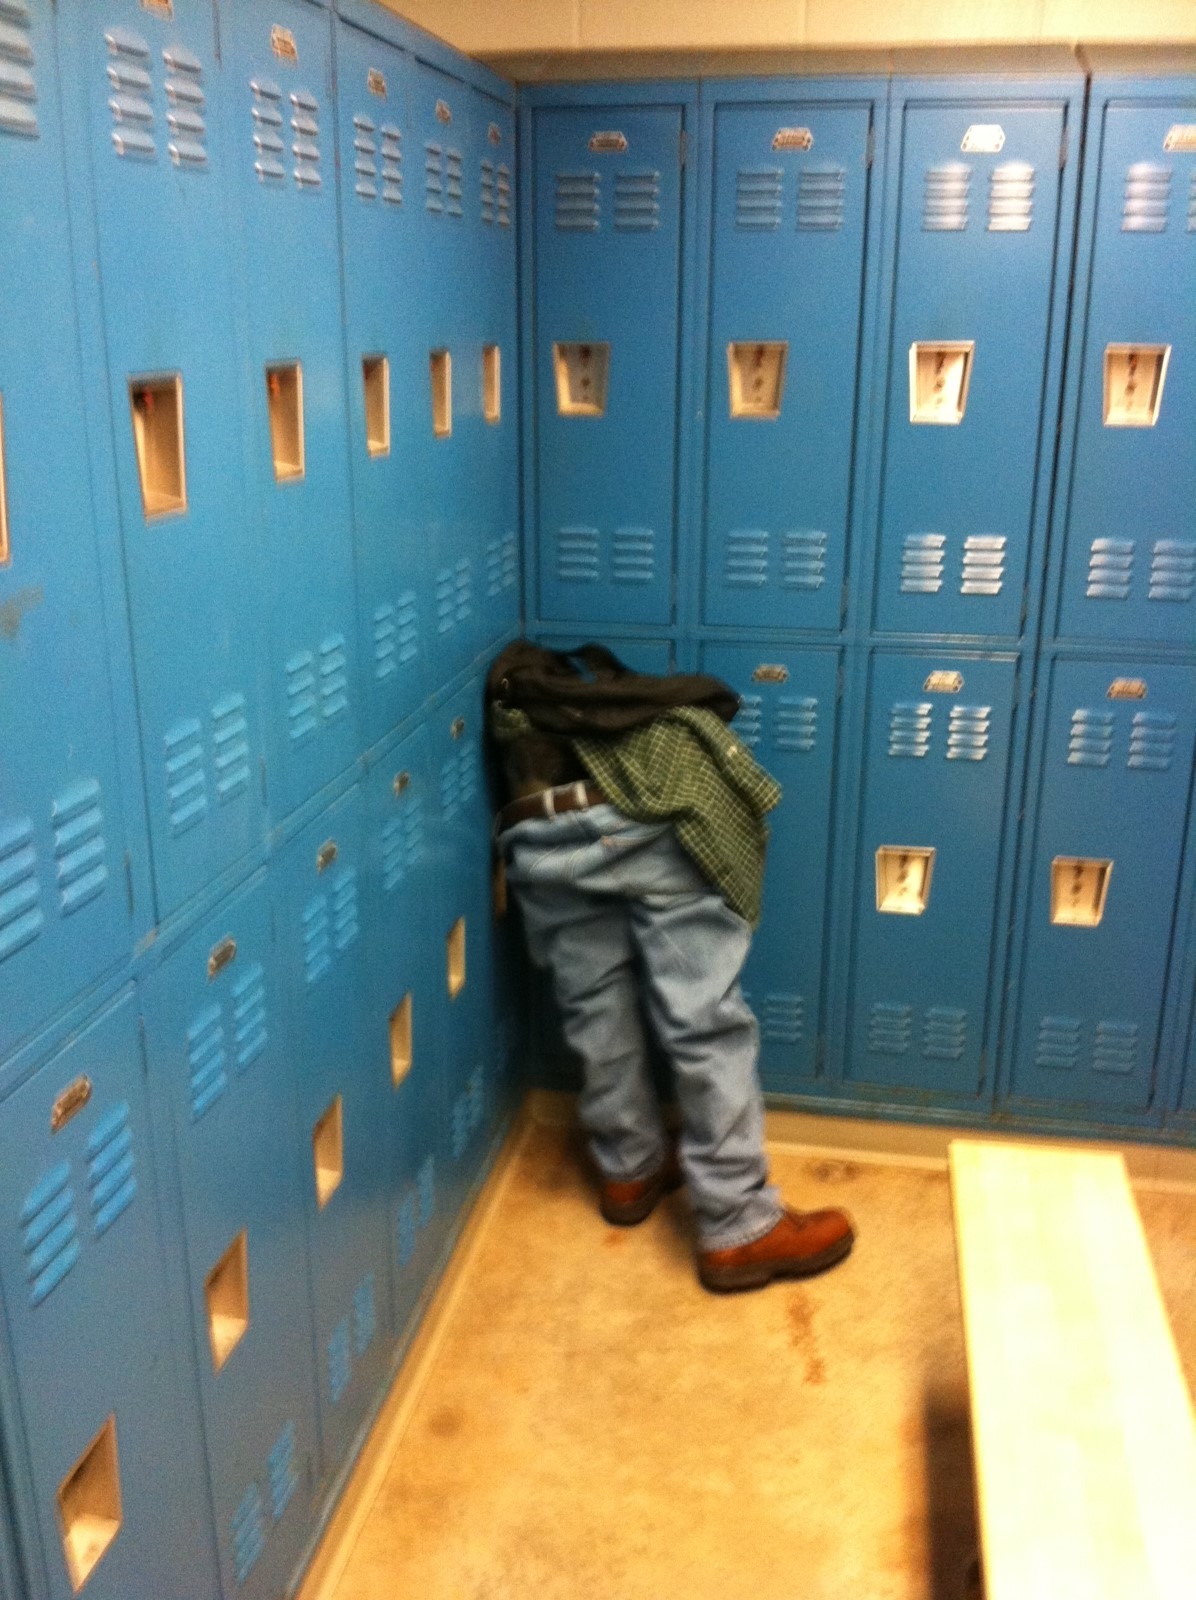 My Friend Walked Into The Gym Locker Room And This Is What He Found